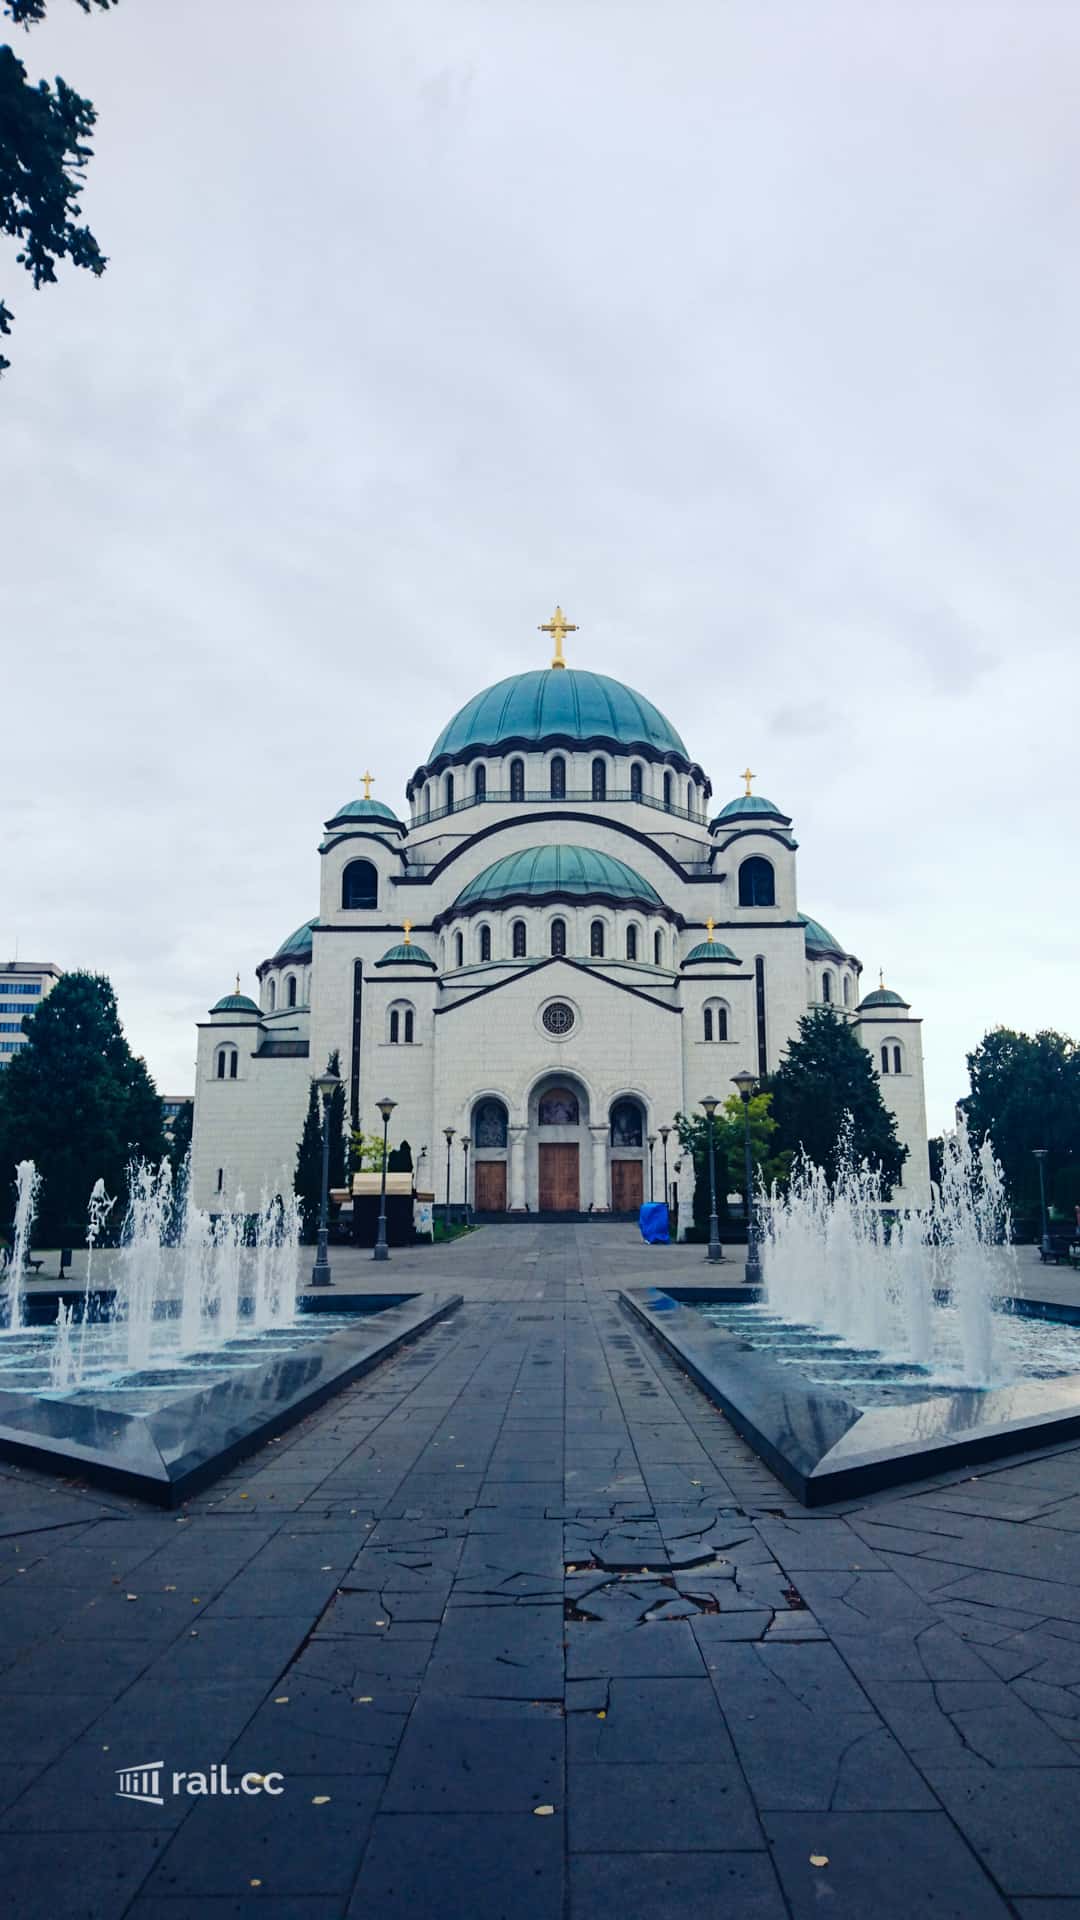 Cathedral of Saint Sava in the early morning